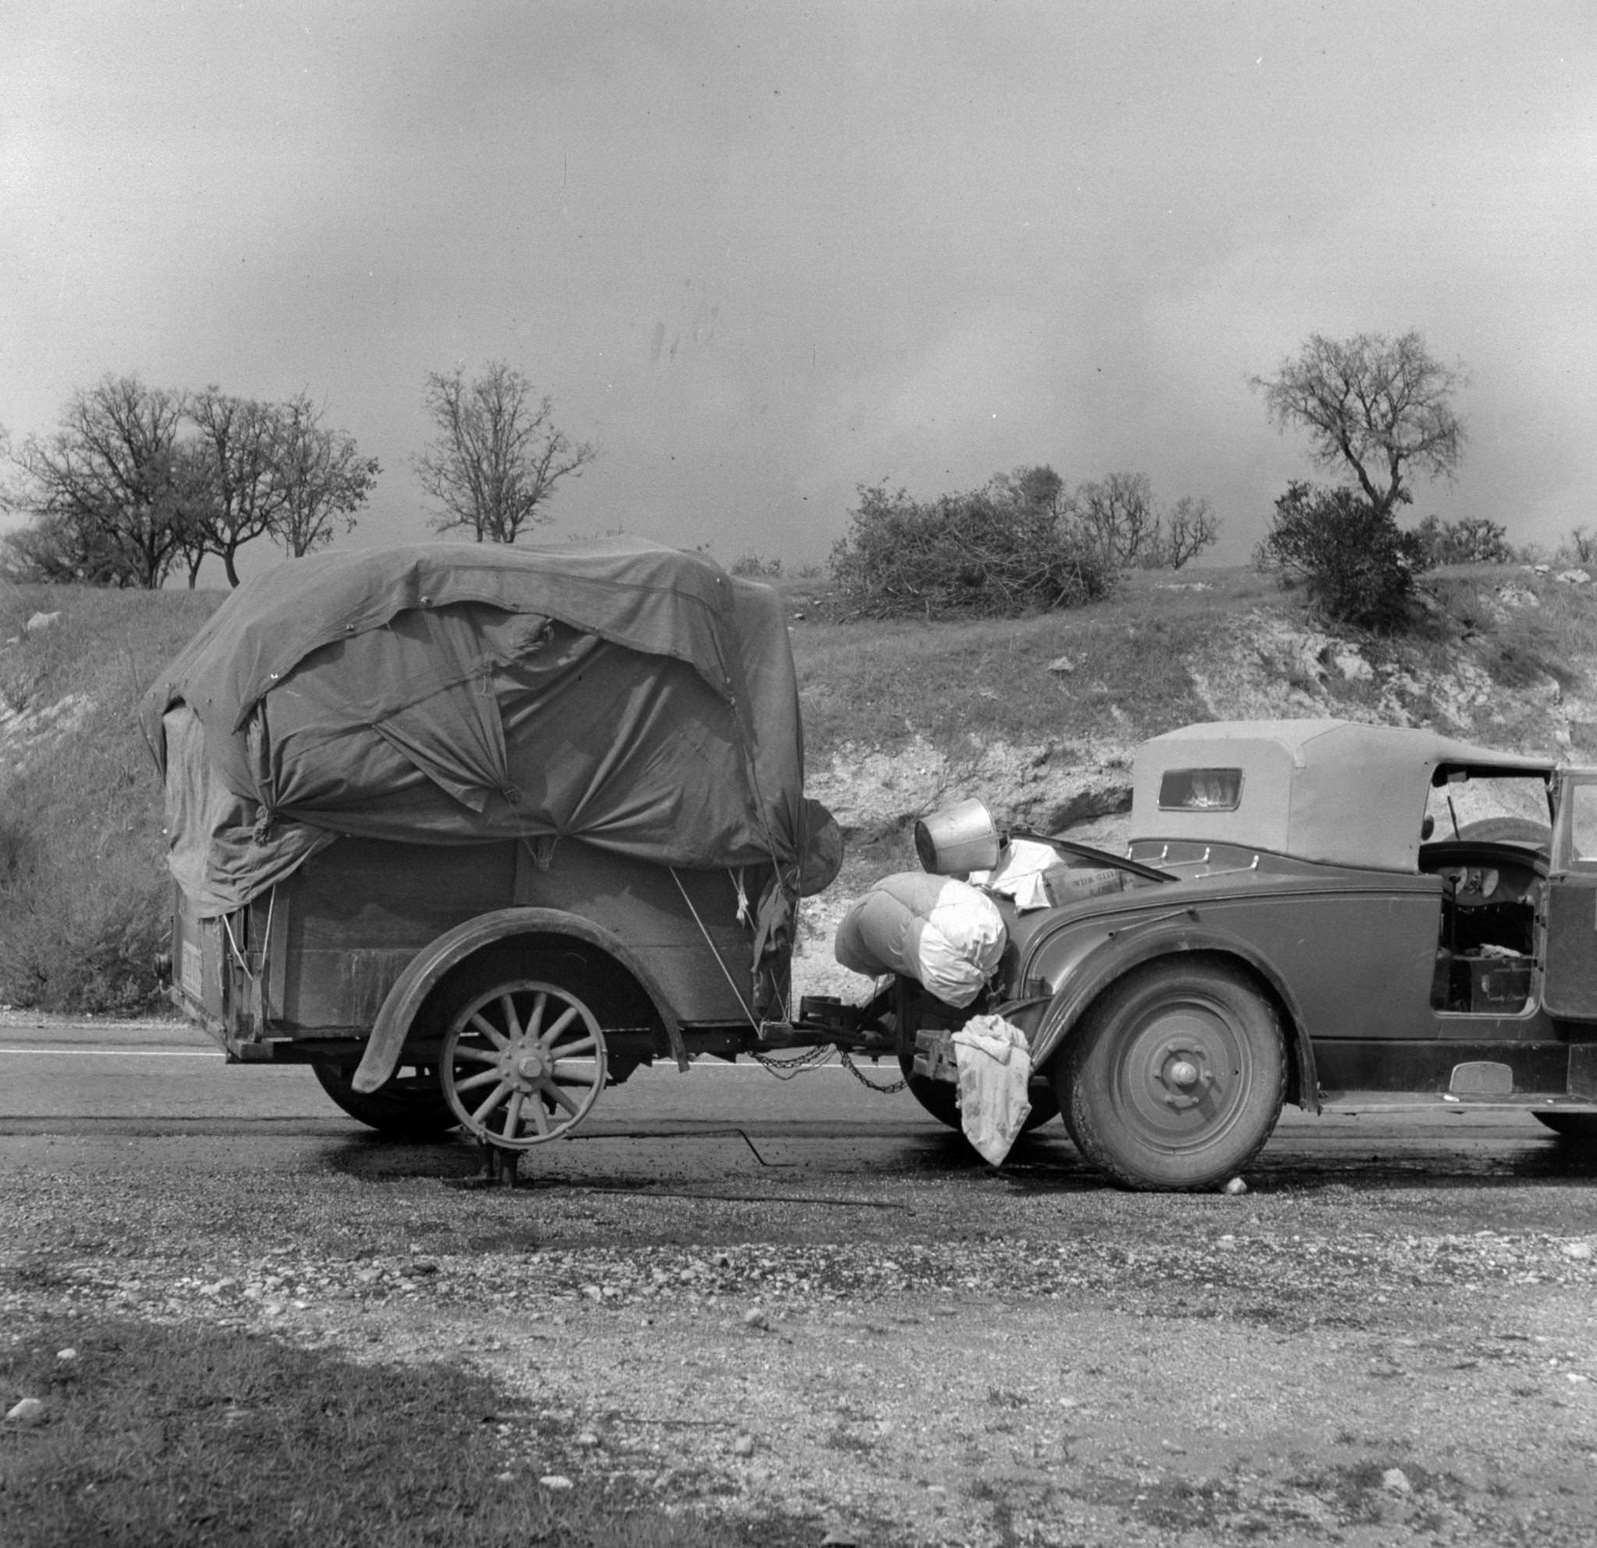 An oil worker builds himself a trailer and takes to the road. California, 1930s